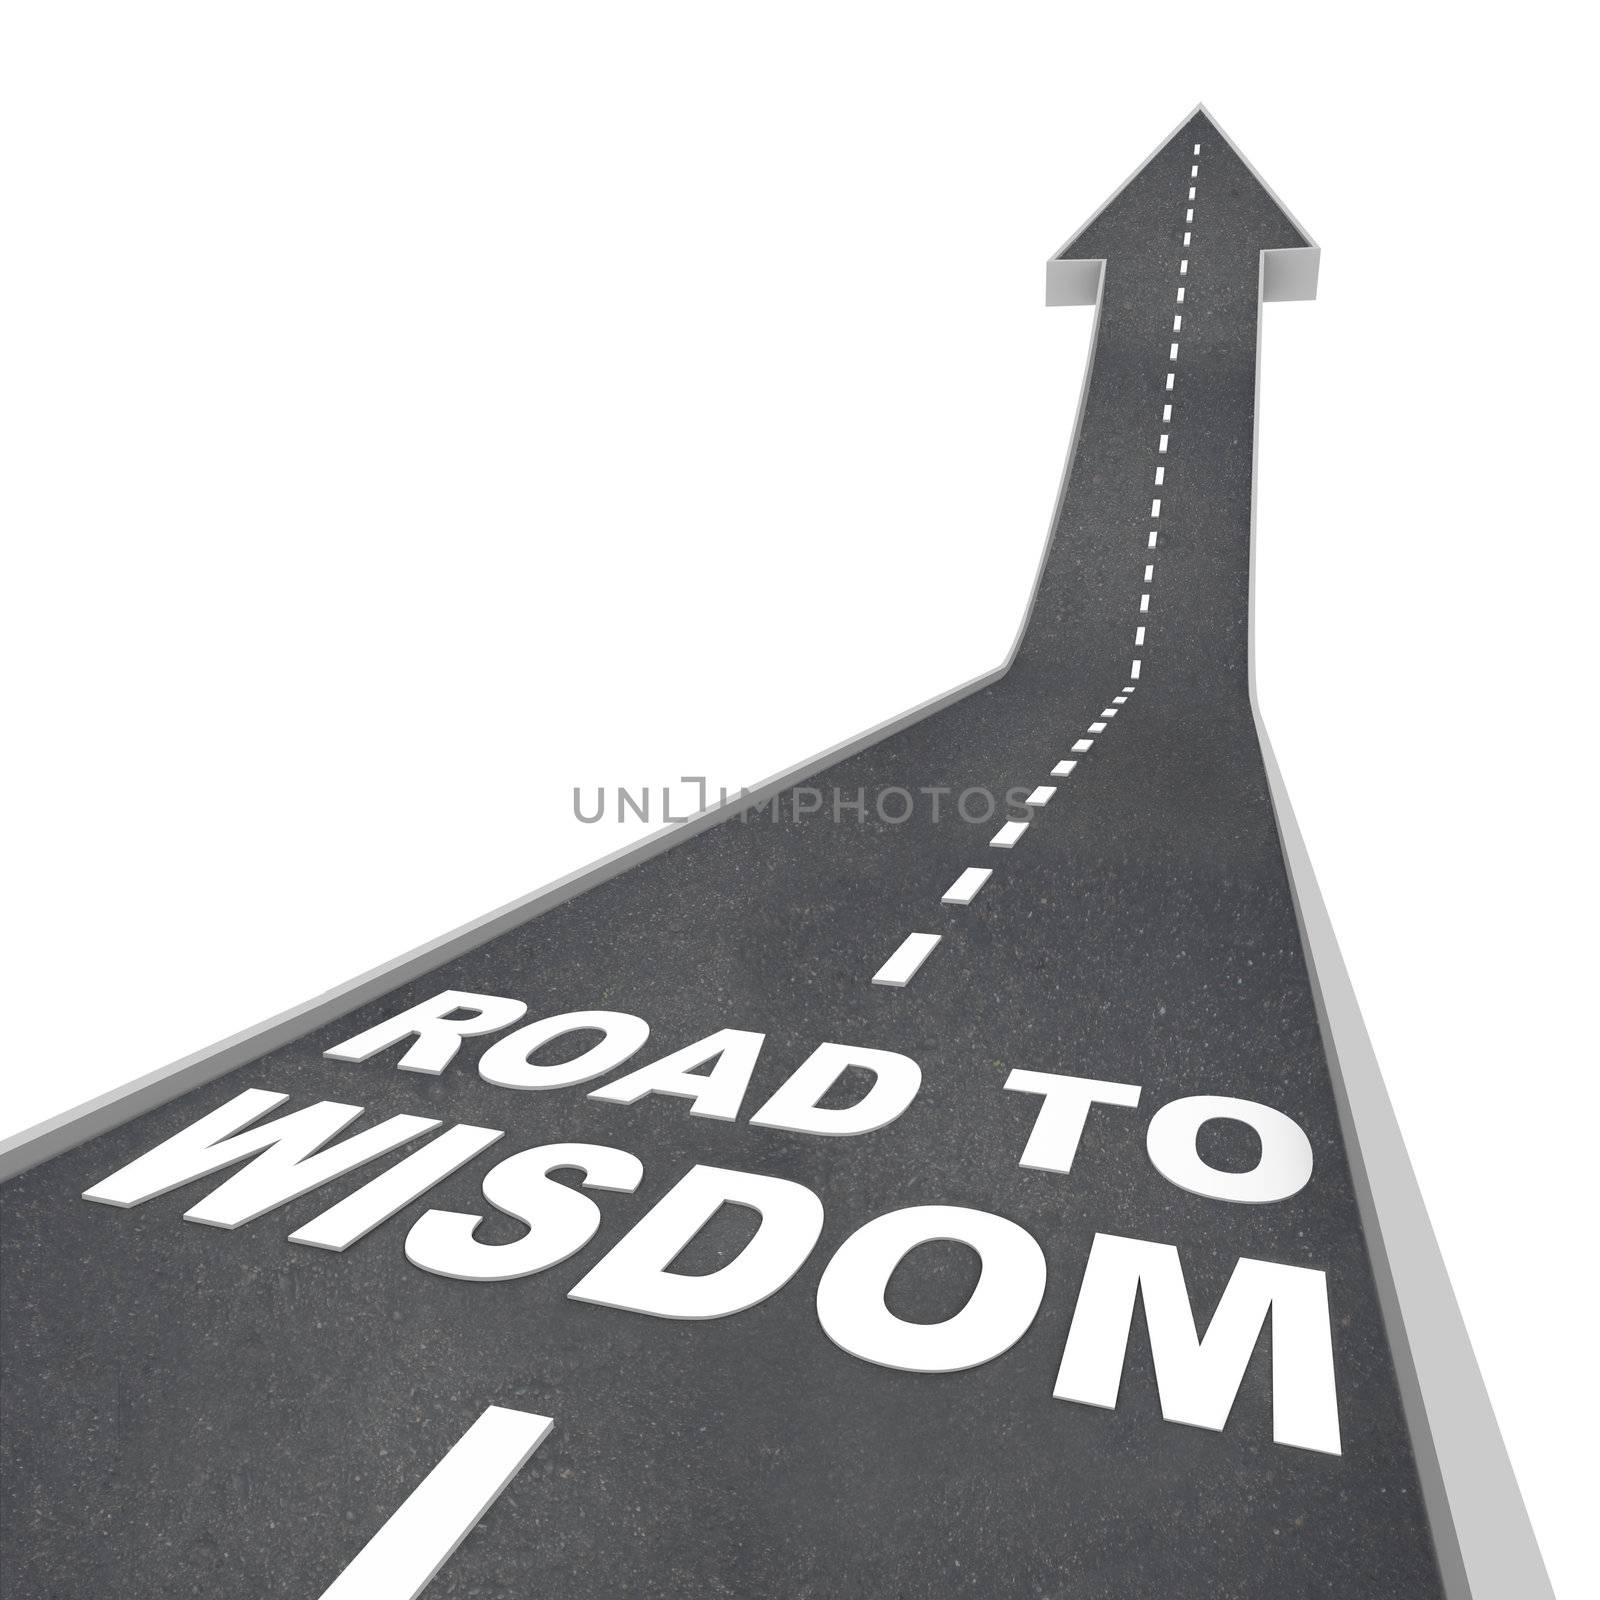 The words Road to Wisdom on a road leading upward to the future, increasing your intelligence and enlightenment through education